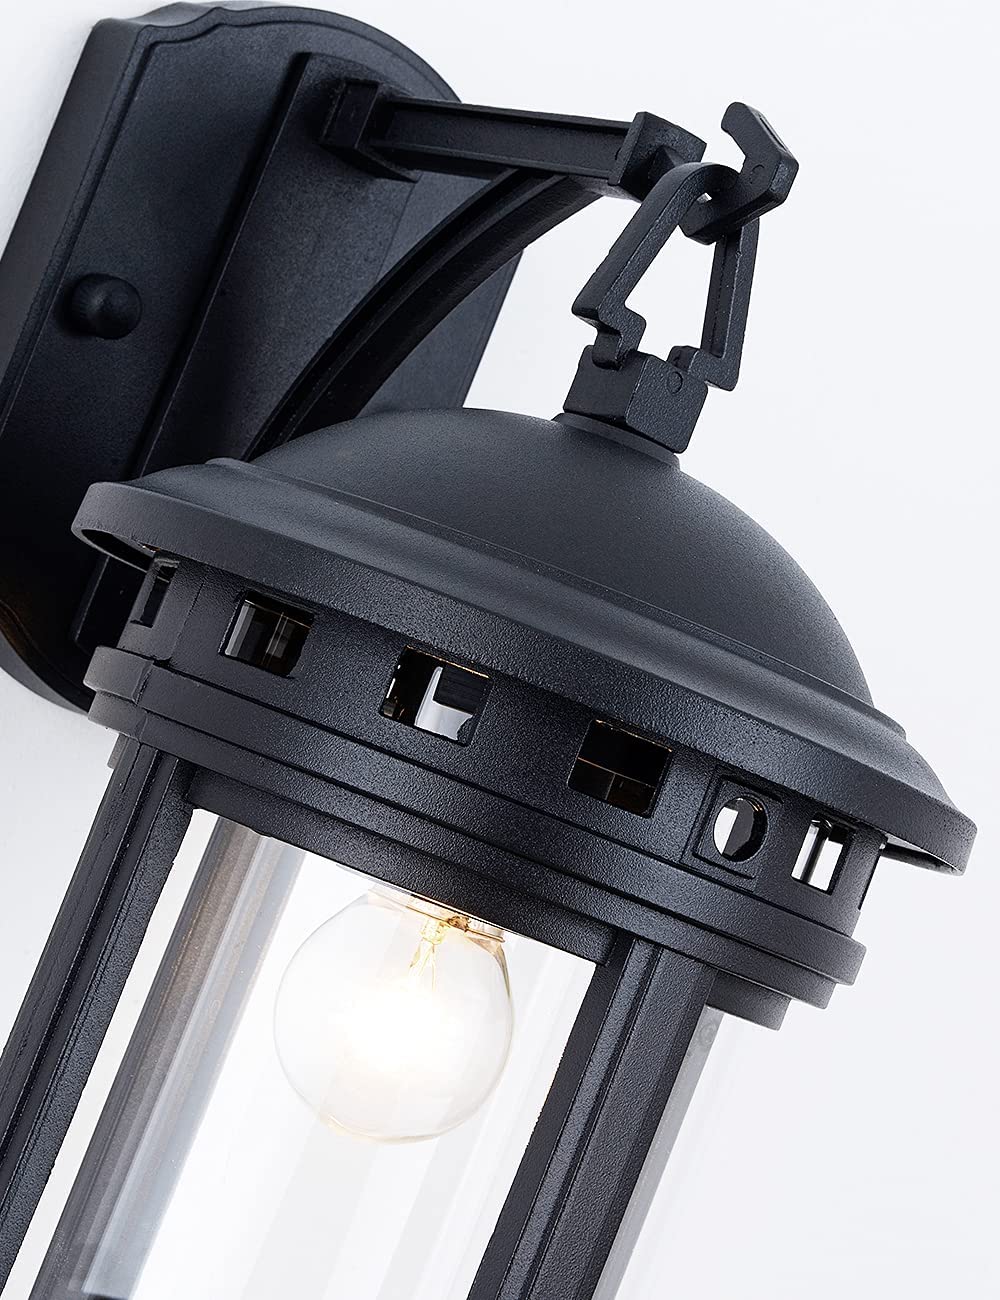 Modern  black wall sconce outdoor wall lantern with glass shade